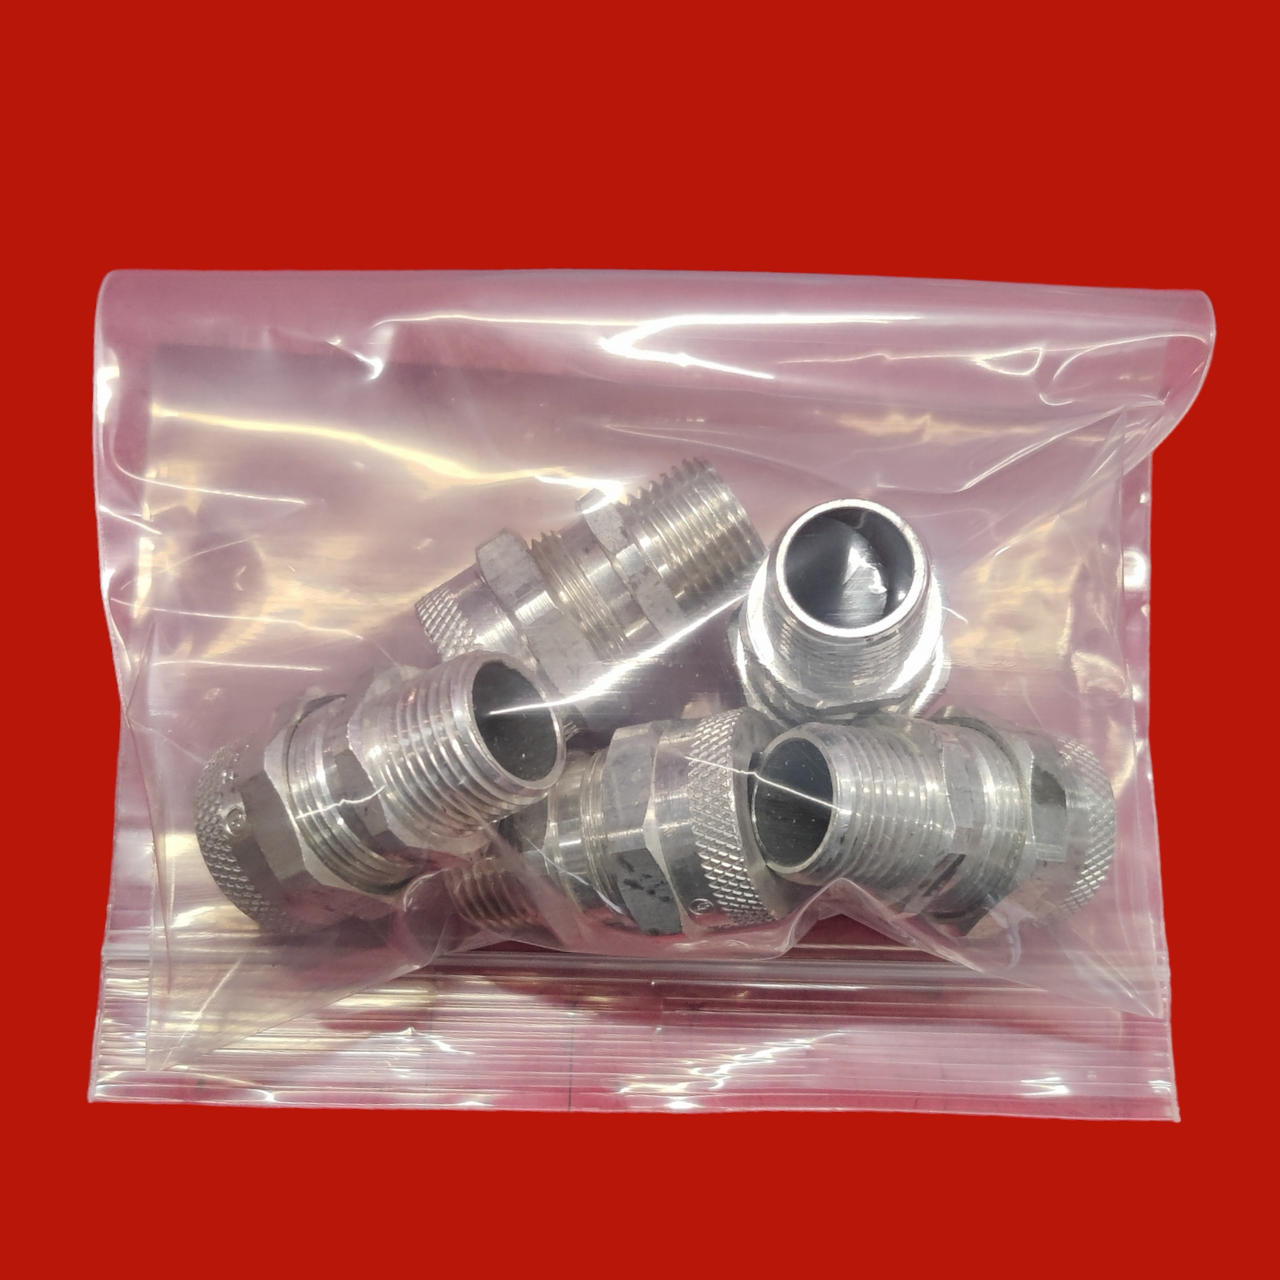 Remke RSR-106 1/2" Aluminum Cord Grip Connector, Pack of 5